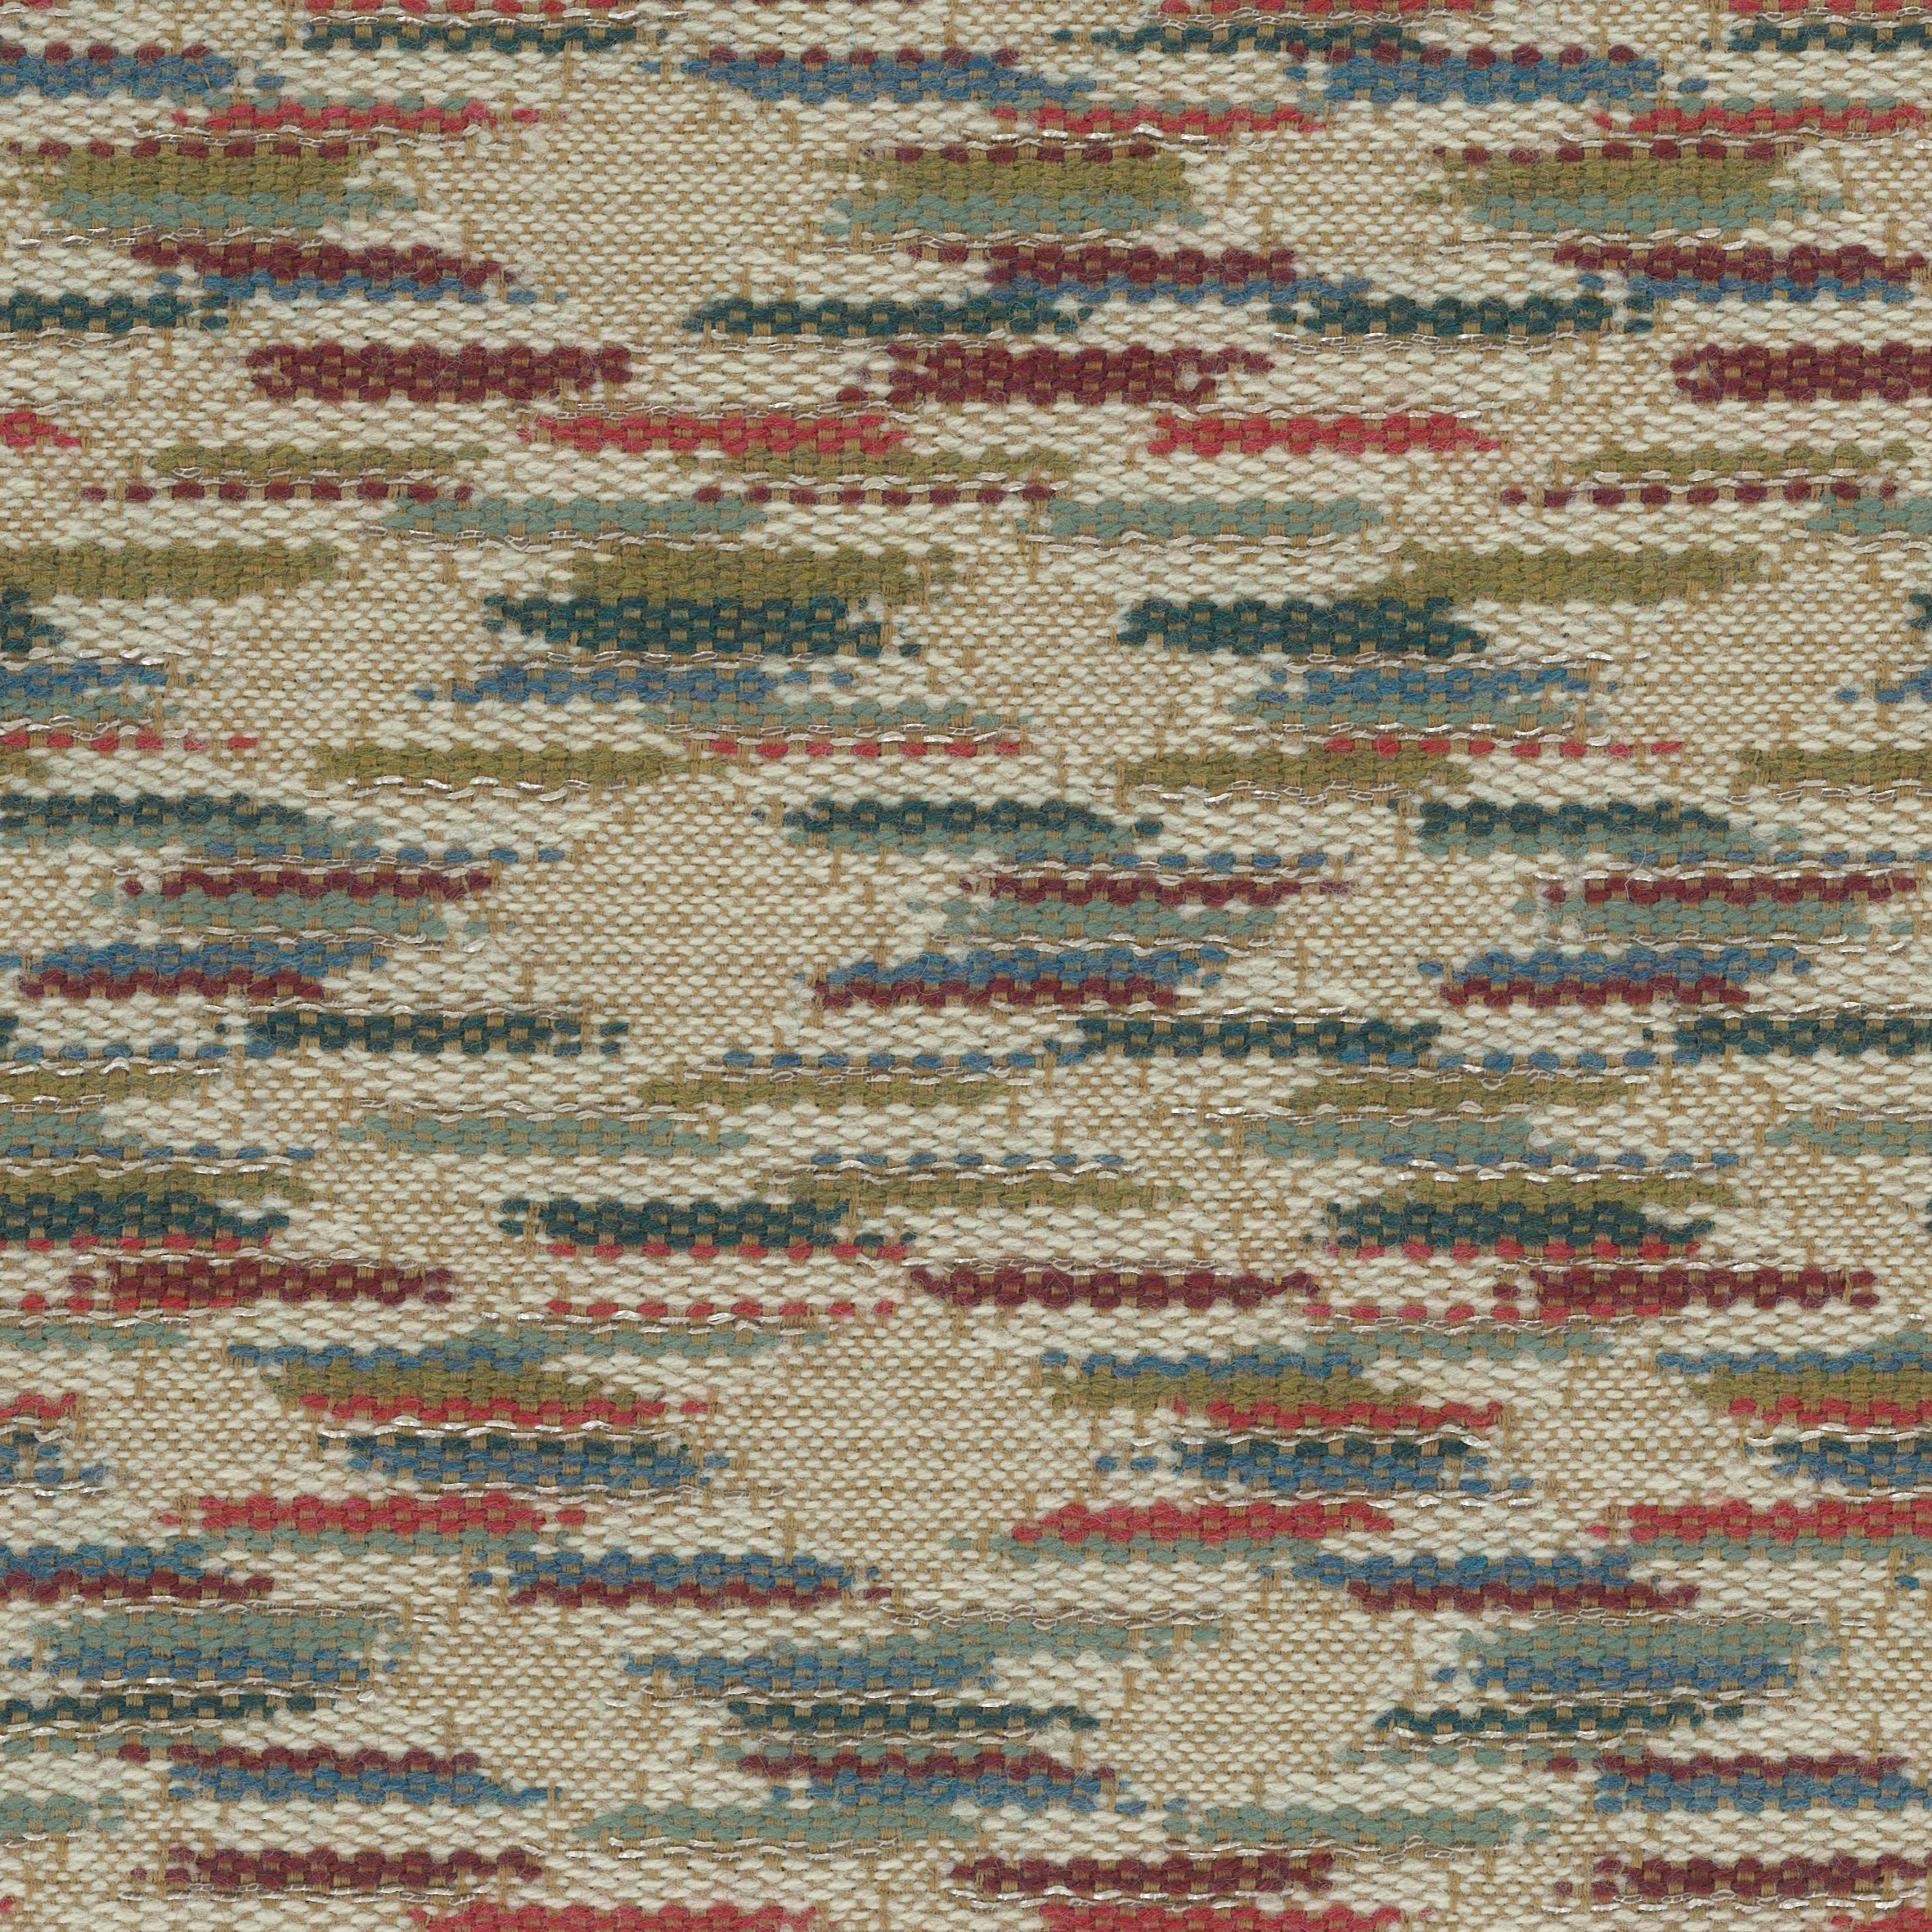 Nina Campbell Fabric - Dallimore Weaves Marden Red/Teal/Olive NCF4524-02